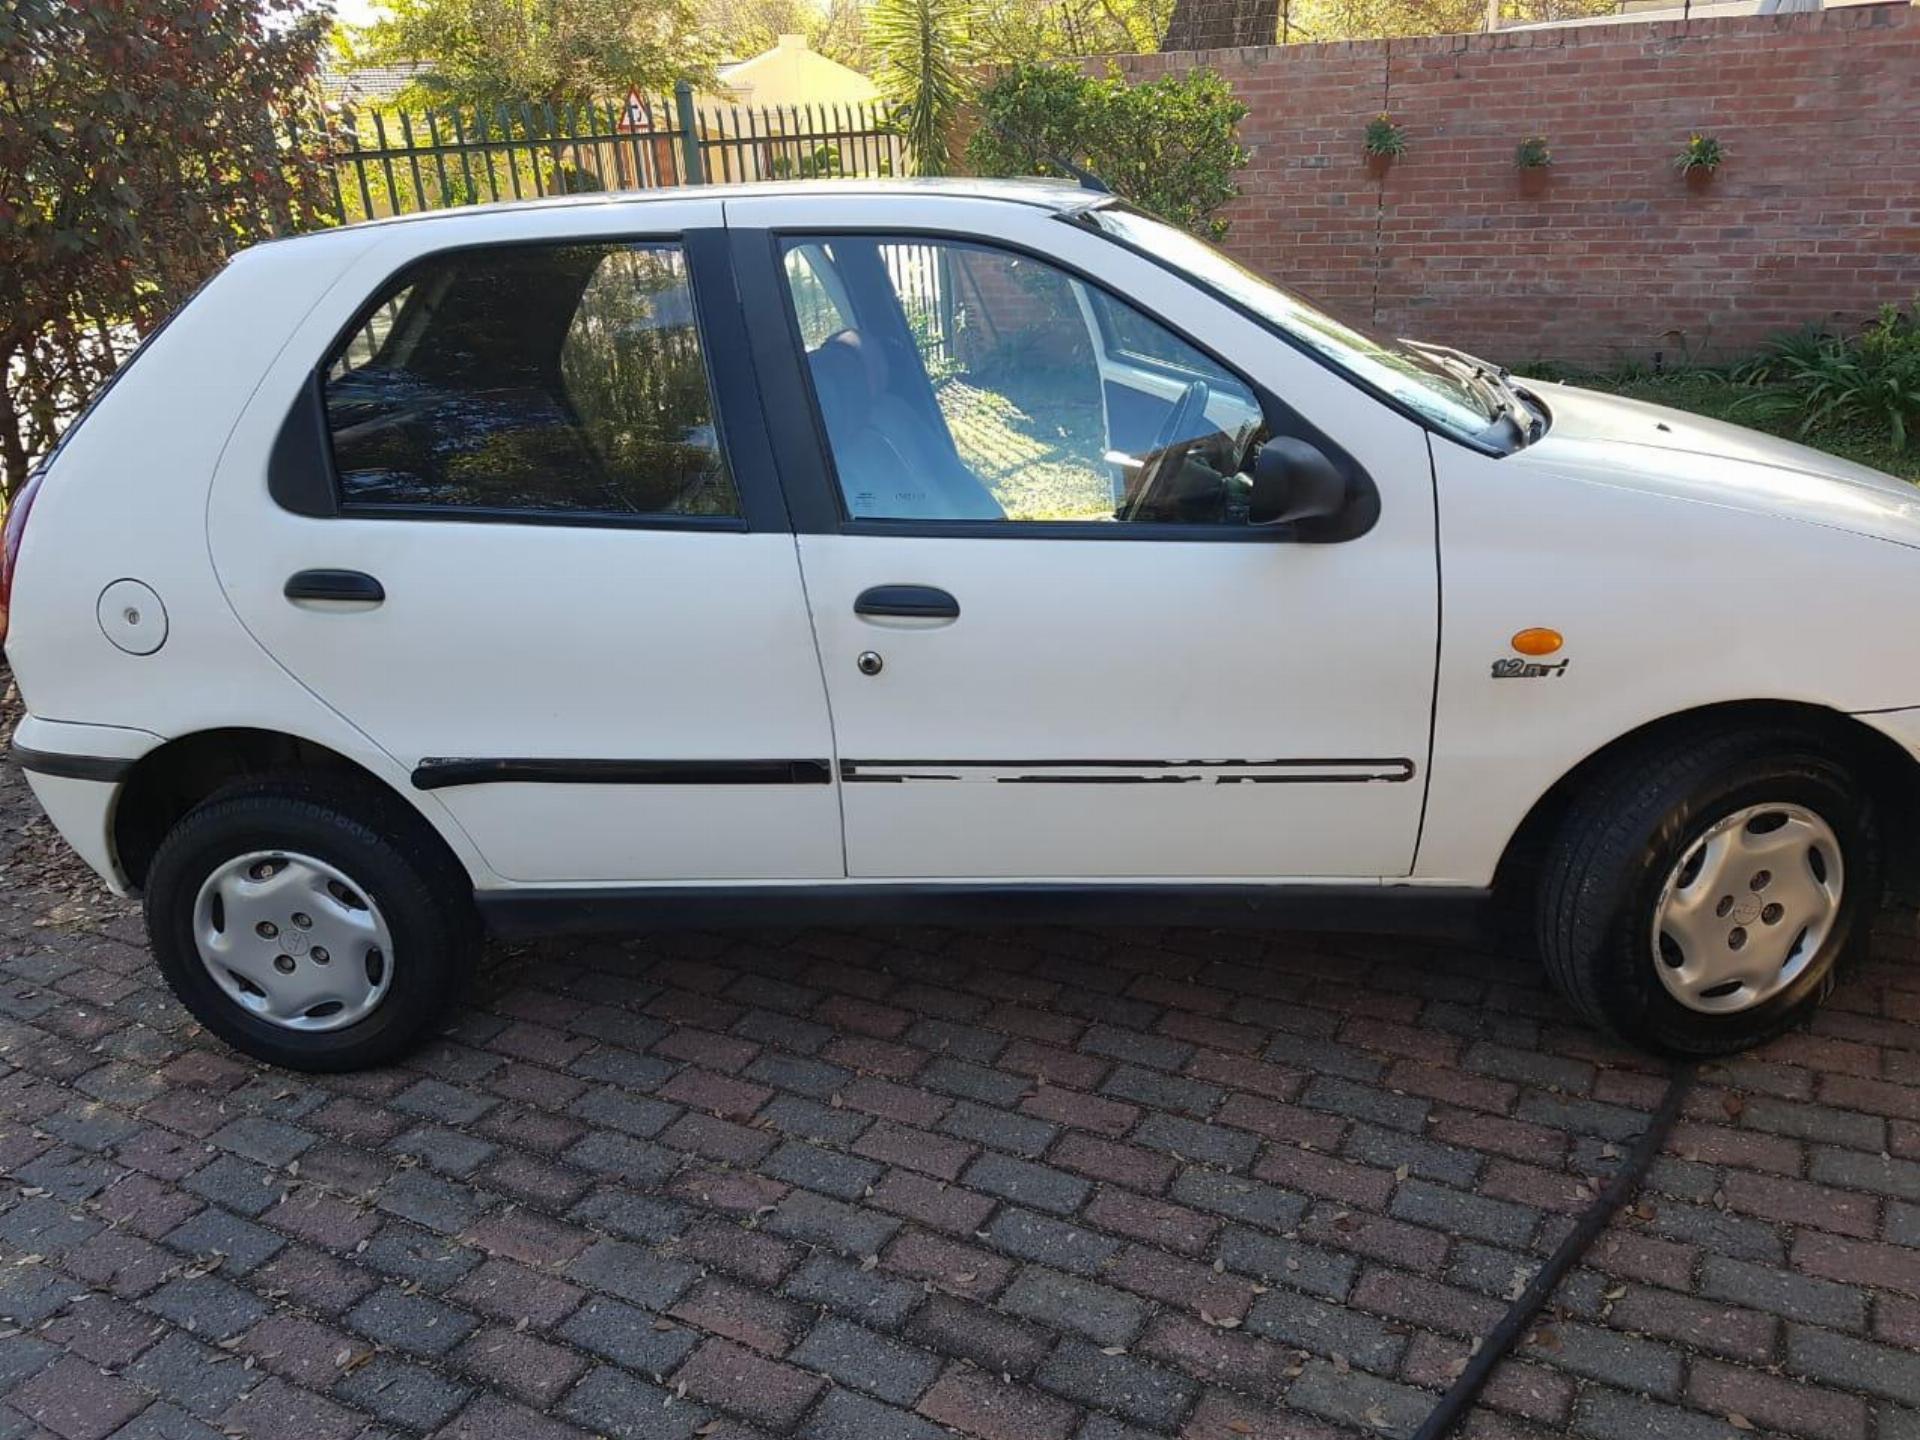 Used Fiat Palio 1.2 2001 on auction PV1029815